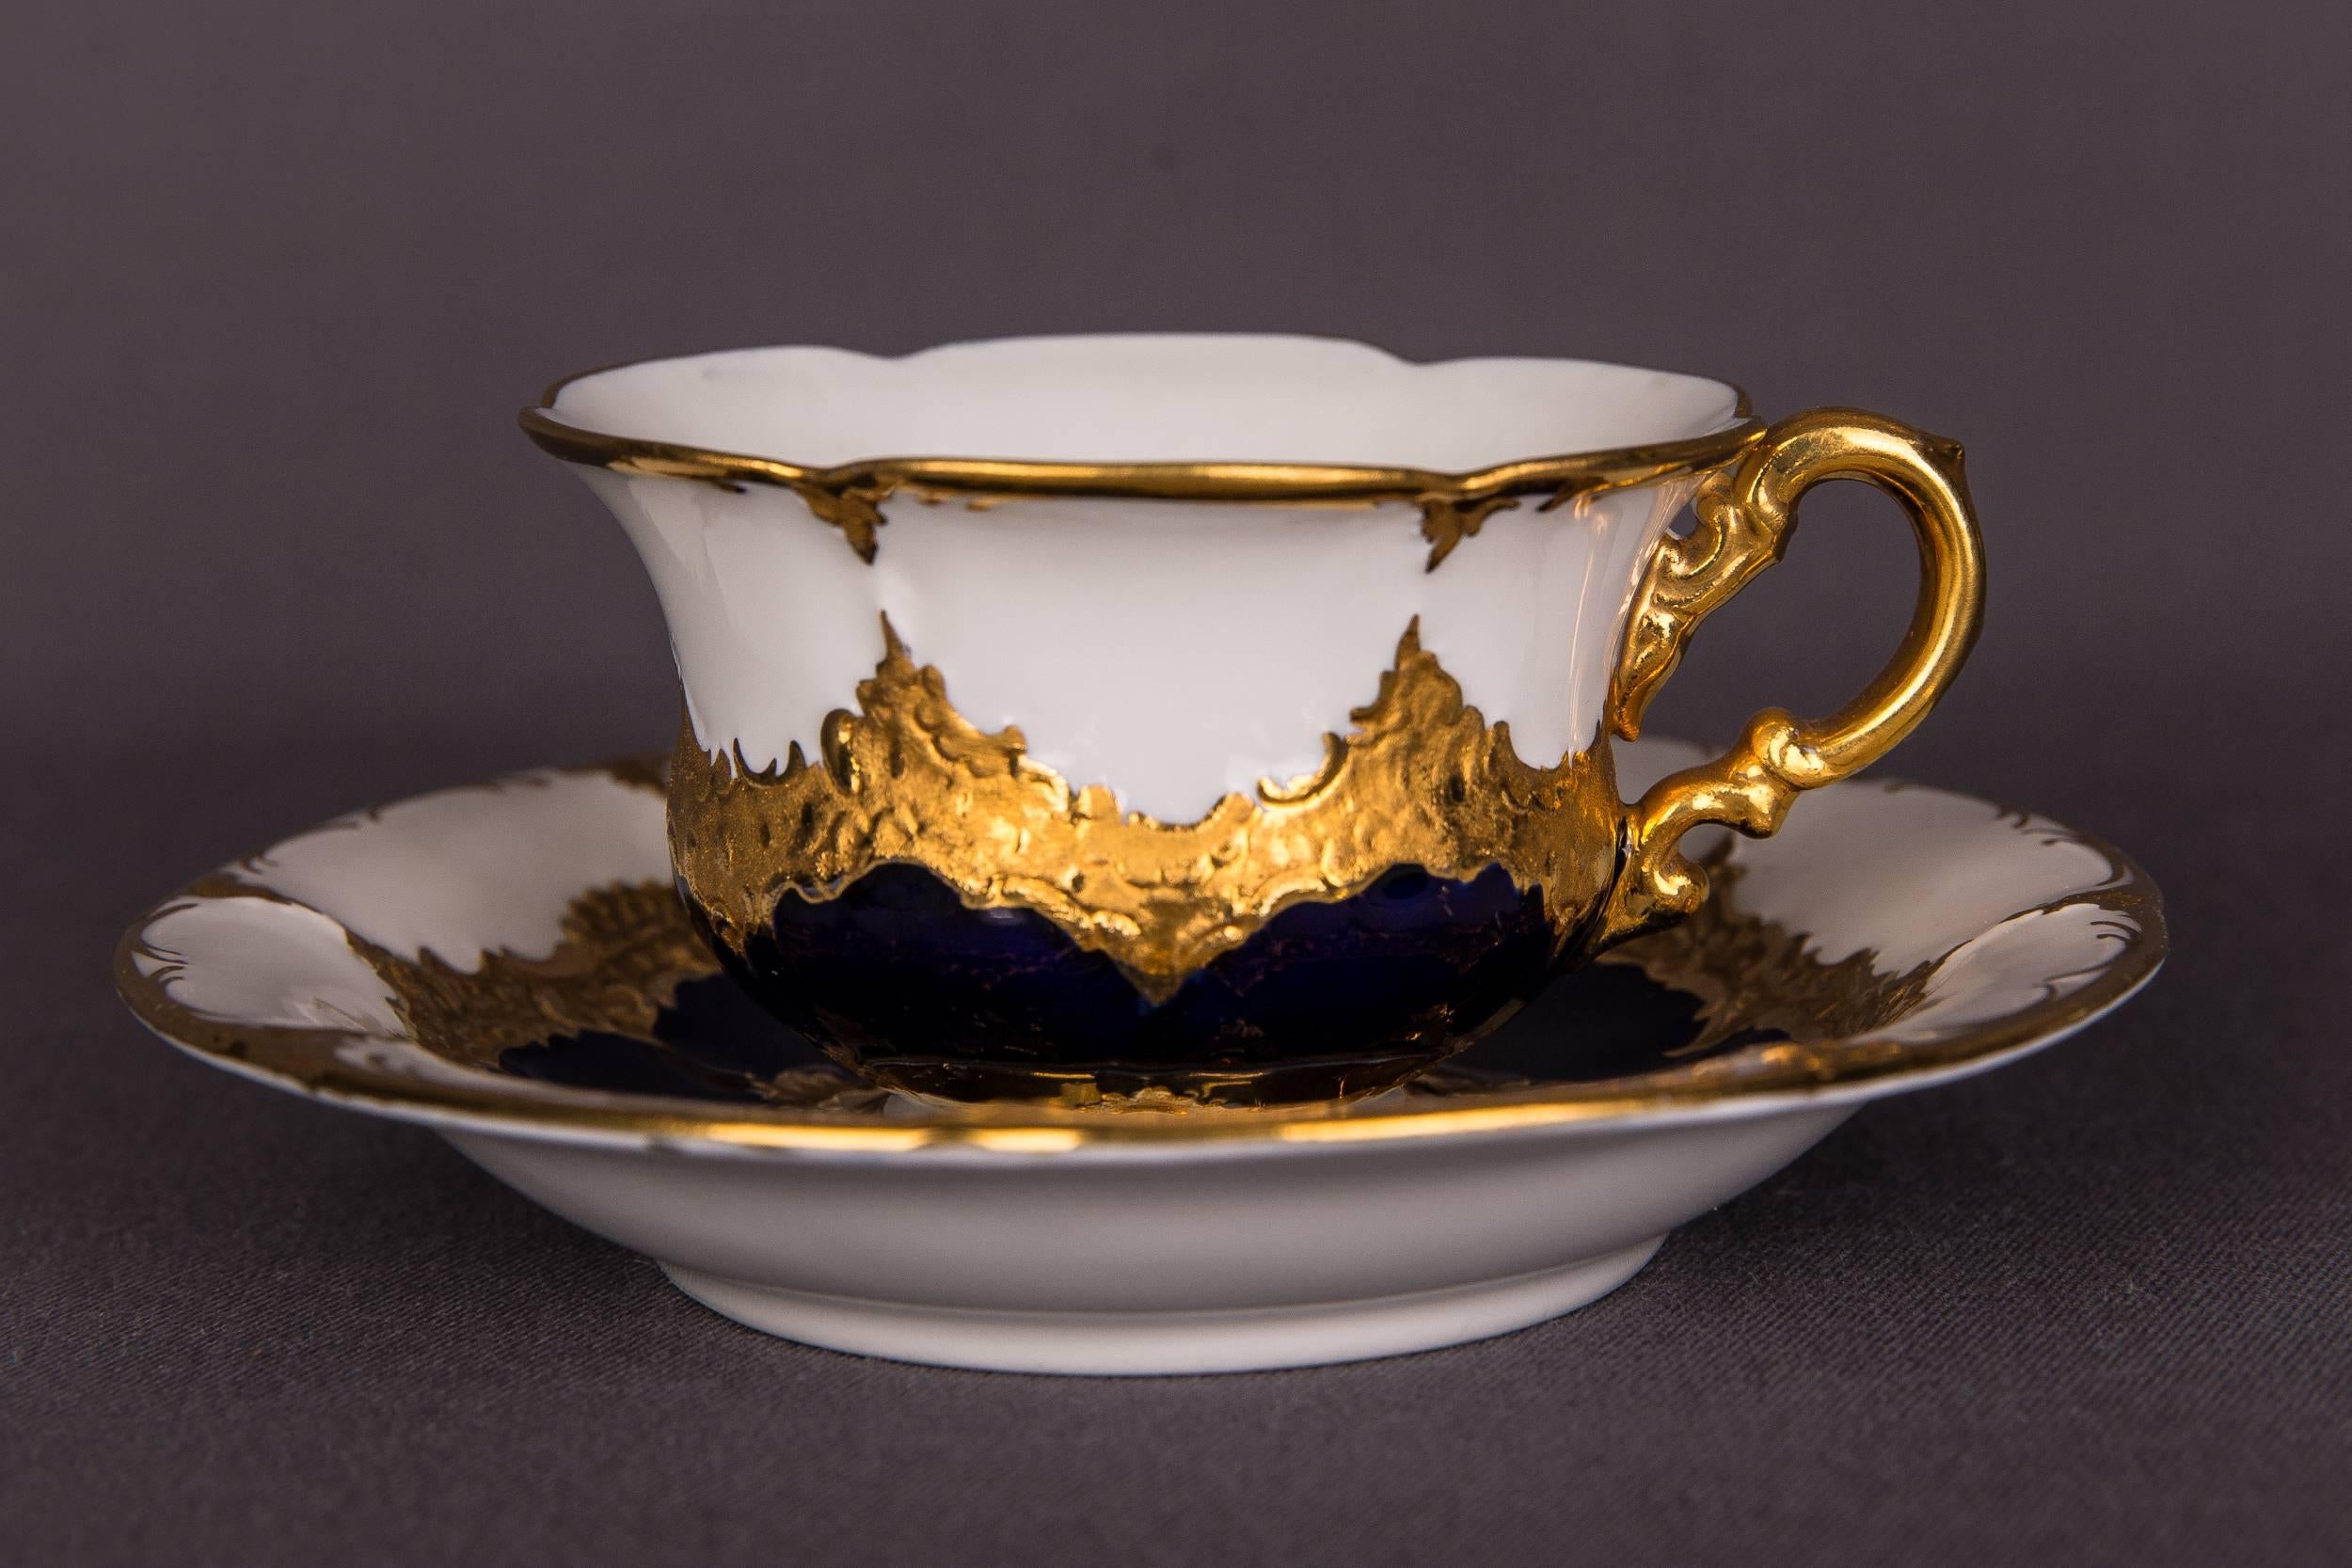 Very elaborate and finely painted.

Very fine finish.

Meissen 2 grinding strokes, Pfeifferzeit

Dimensions:
Cup (height: 5 cm diameter: 8cm)
Saucer (Height: 2.5 cm diameter: 13 cm)

The piece is not damaged and is in a good condition,